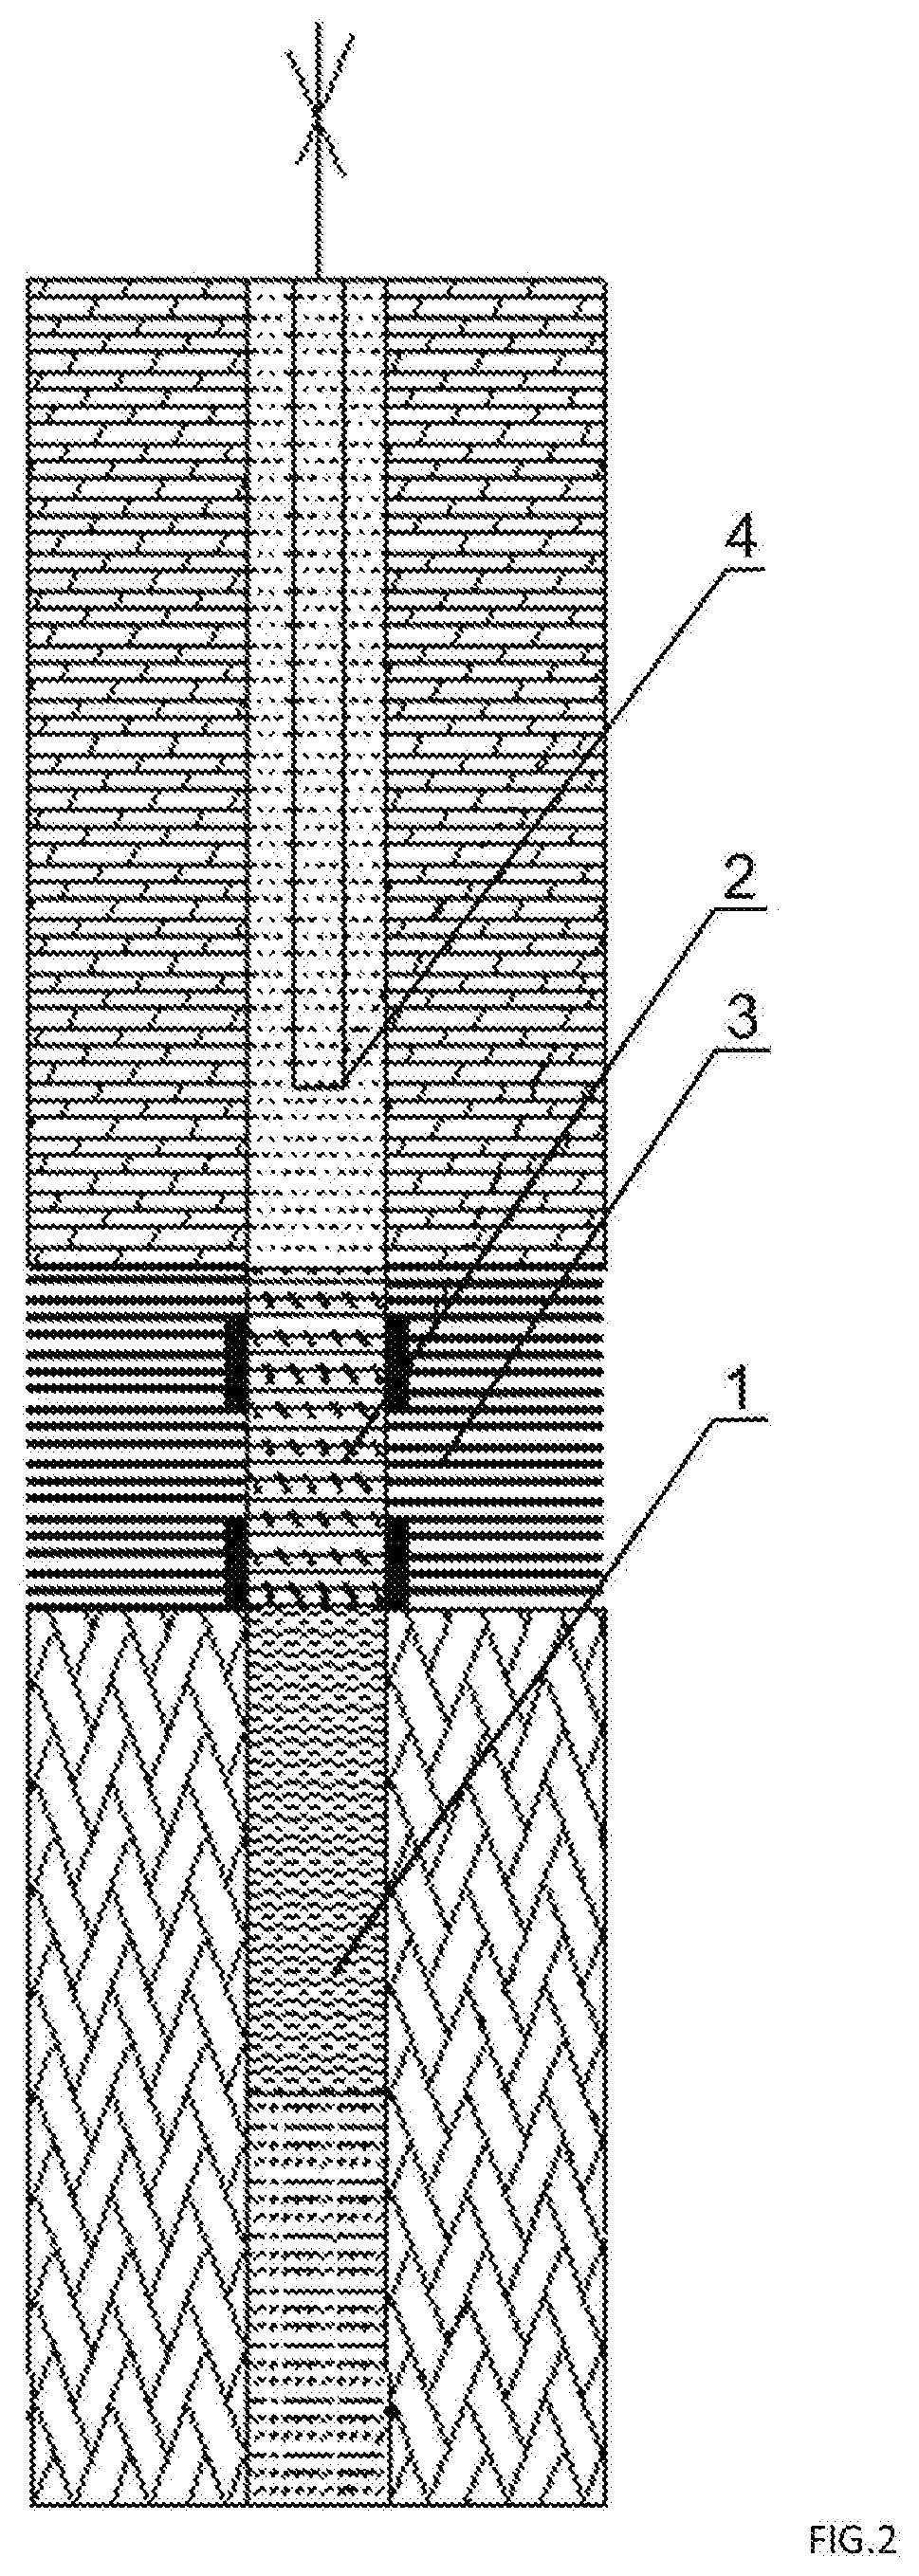 Method for exerting a combined effect on the near-wellbore region of a producing formation